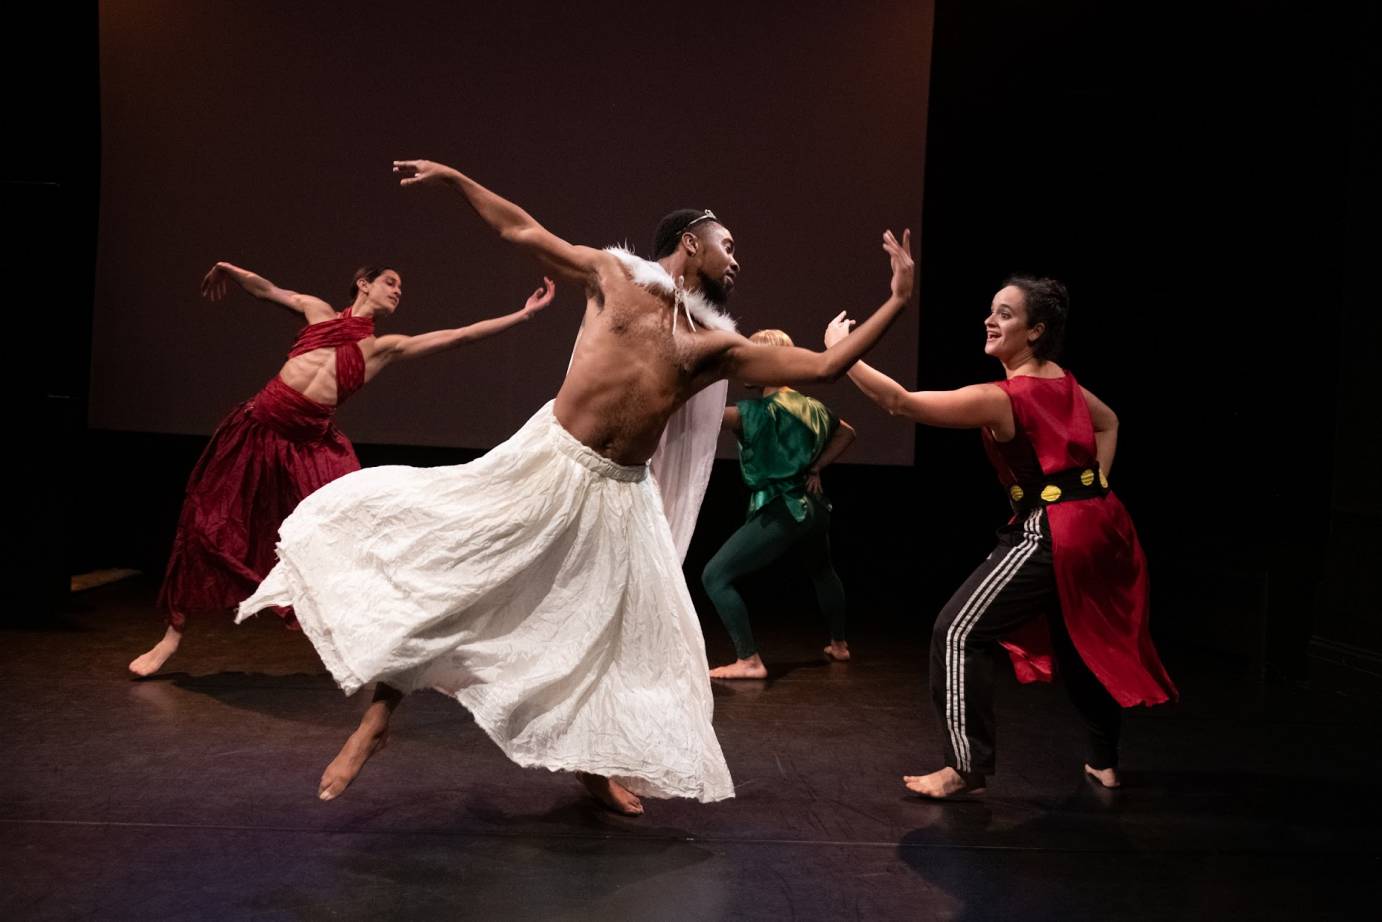 Dark-skinned man bare-chested wearing a long white skirt and tiara partners with a white women in black sweatpants striped with white and red tunic. Her dark hair is piled on her head and she is smiling. In the background a white man in a criss-crossed top and long red dress dances with a mustachioed man in blonde wig, green top and pants.